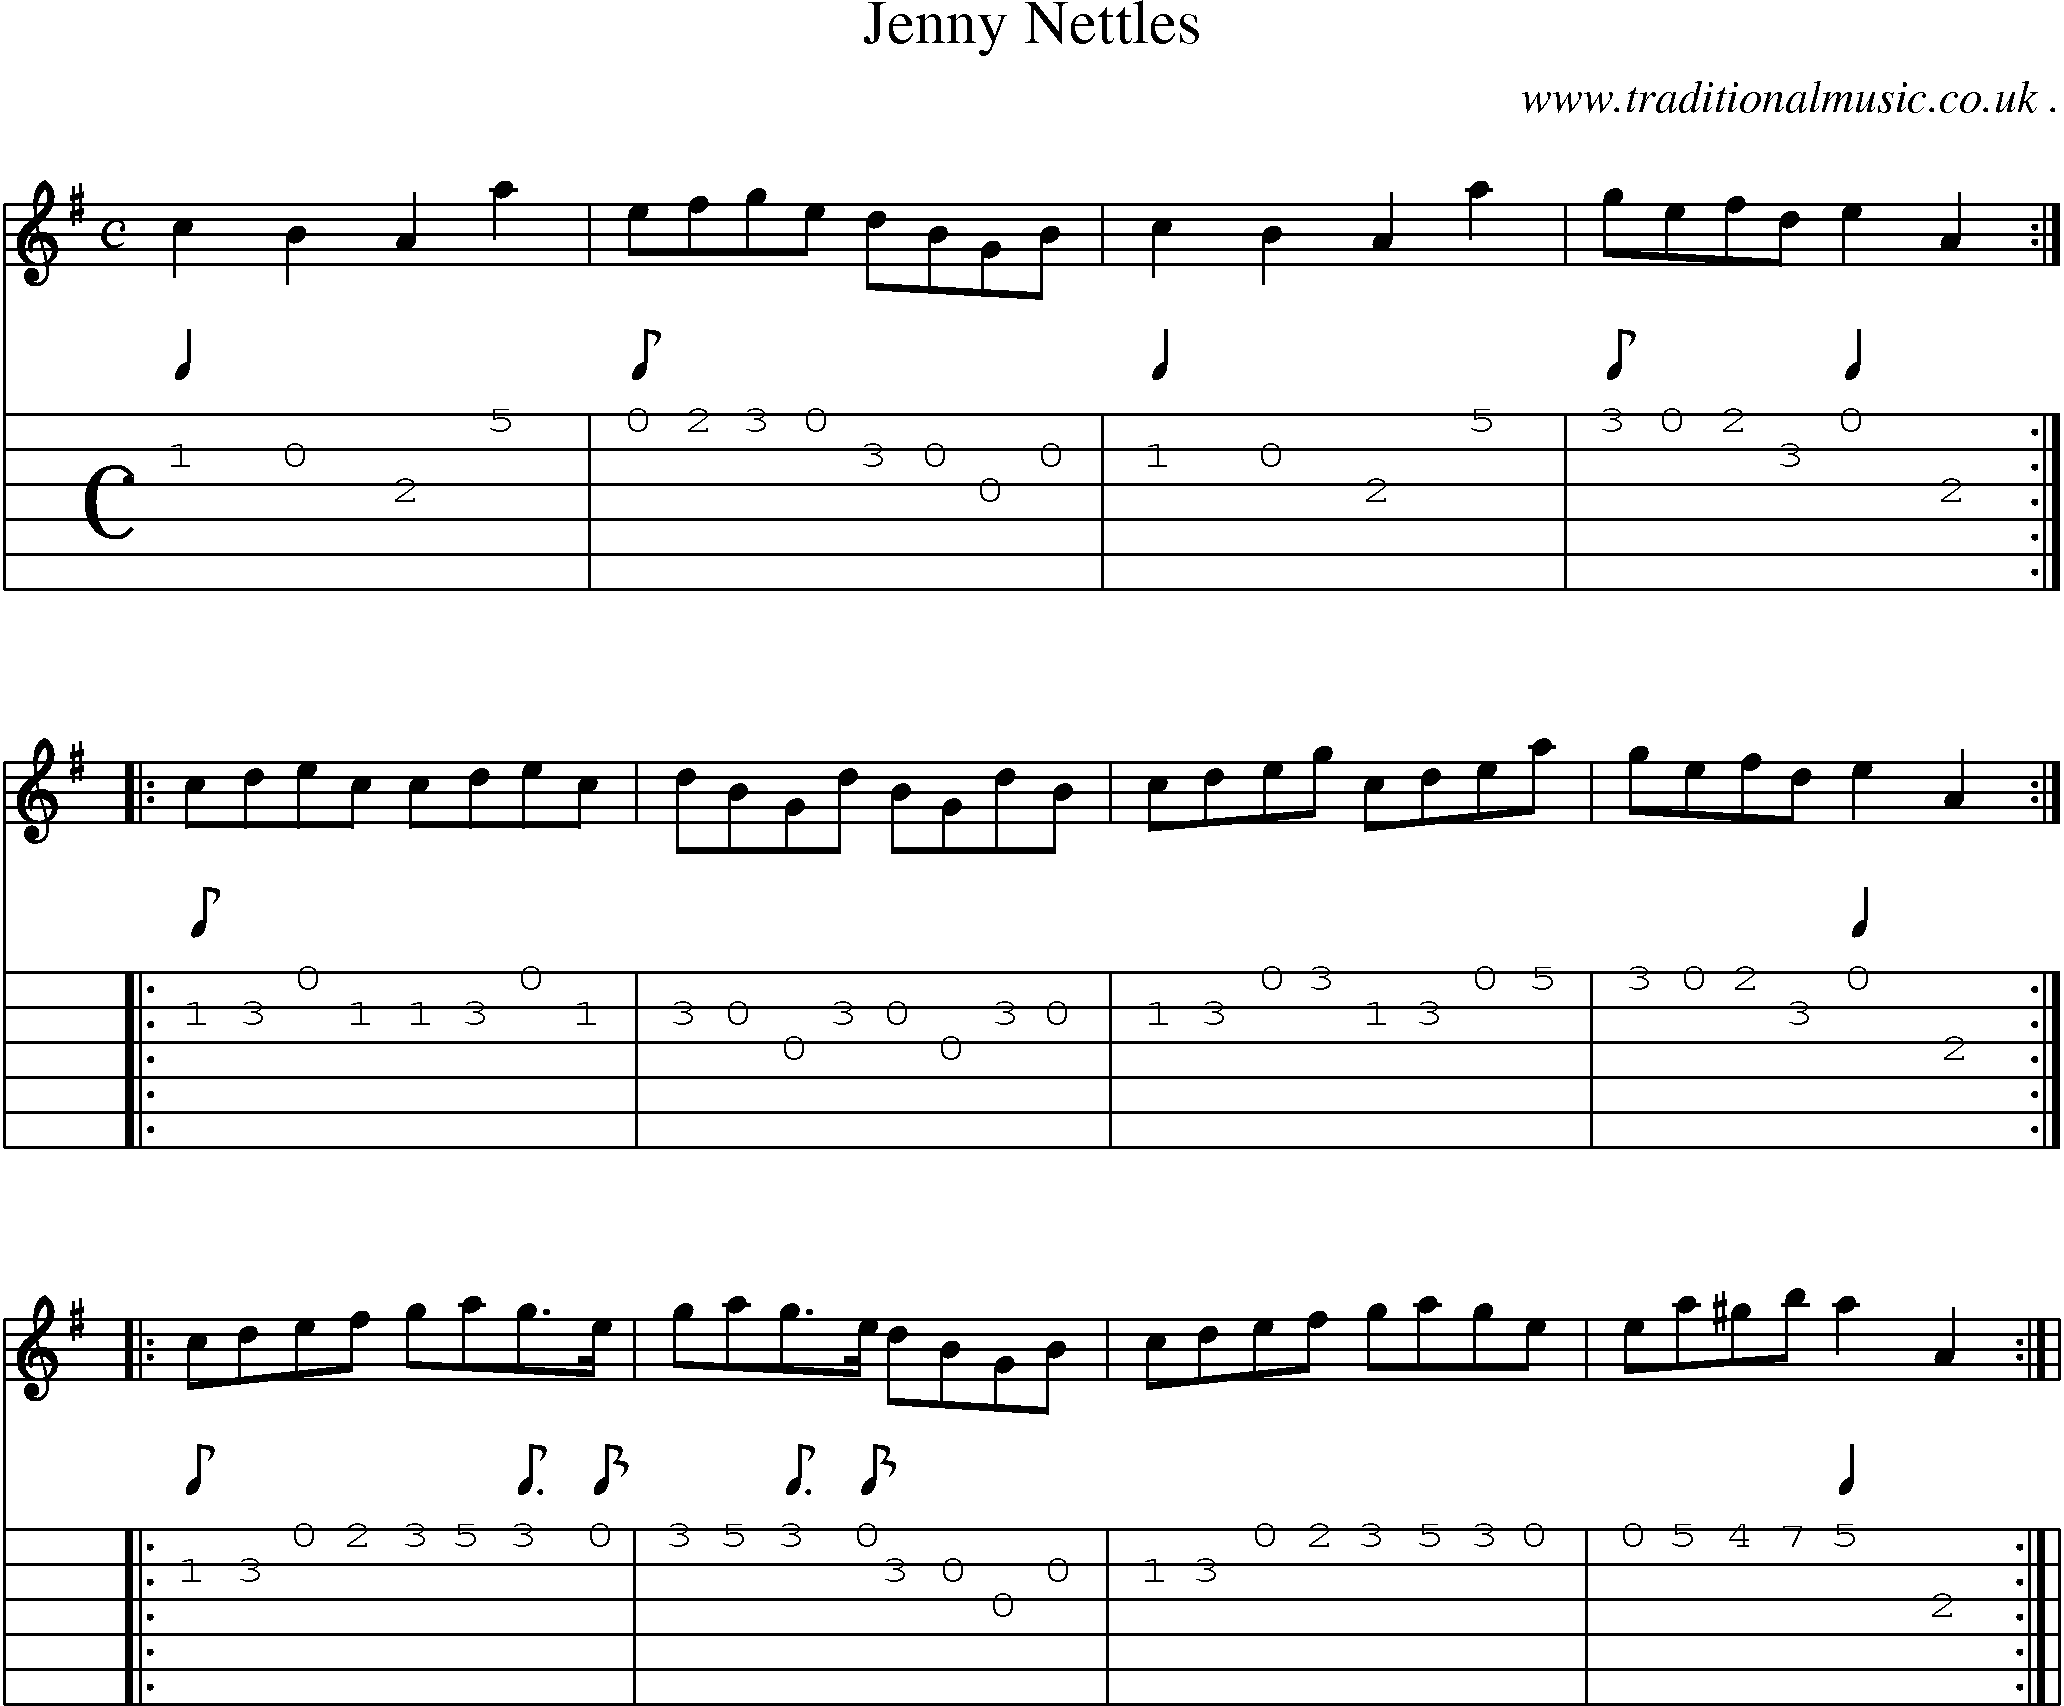 Sheet-Music and Guitar Tabs for Jenny Nettles